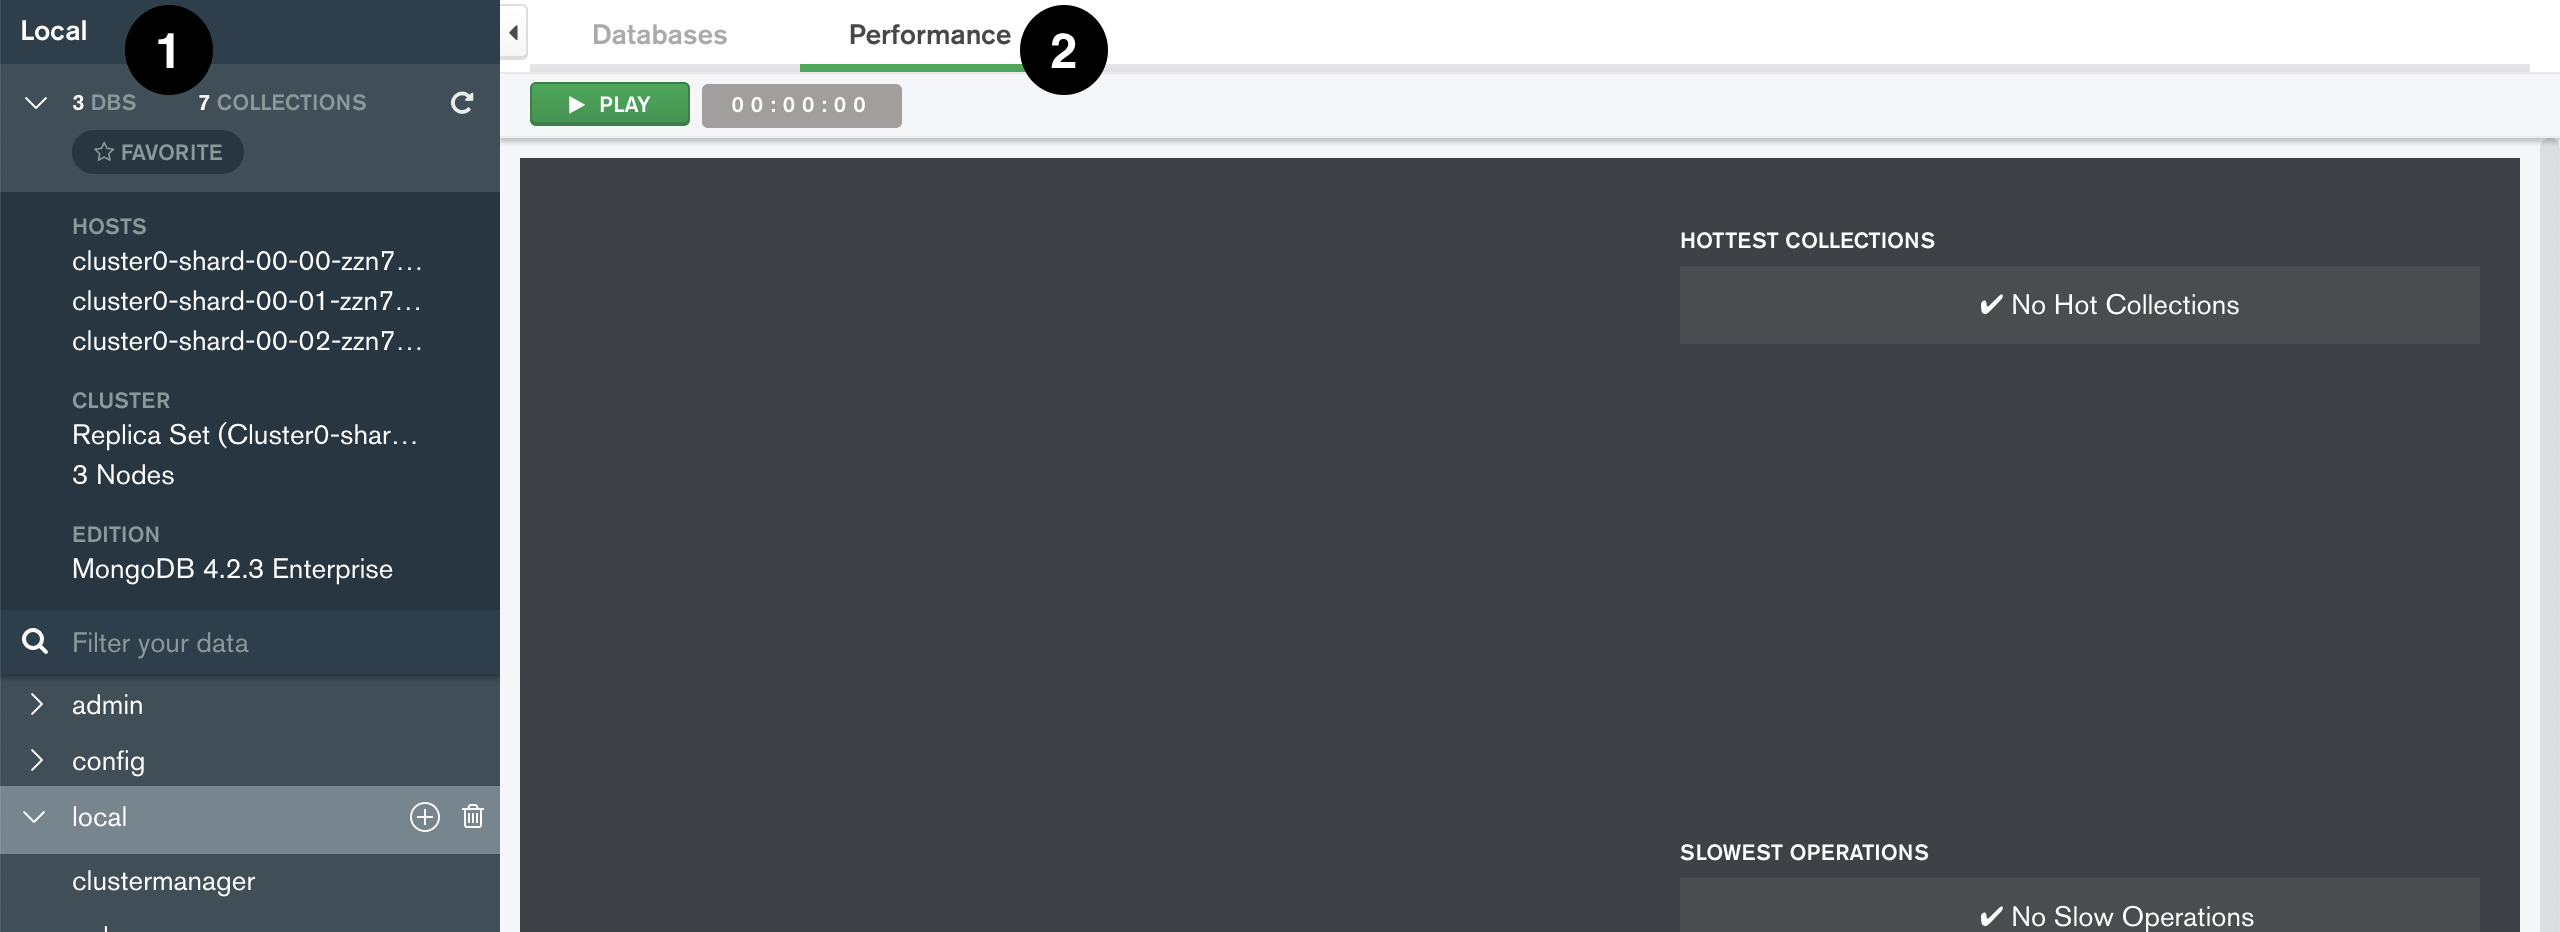 Example of cluster performance view